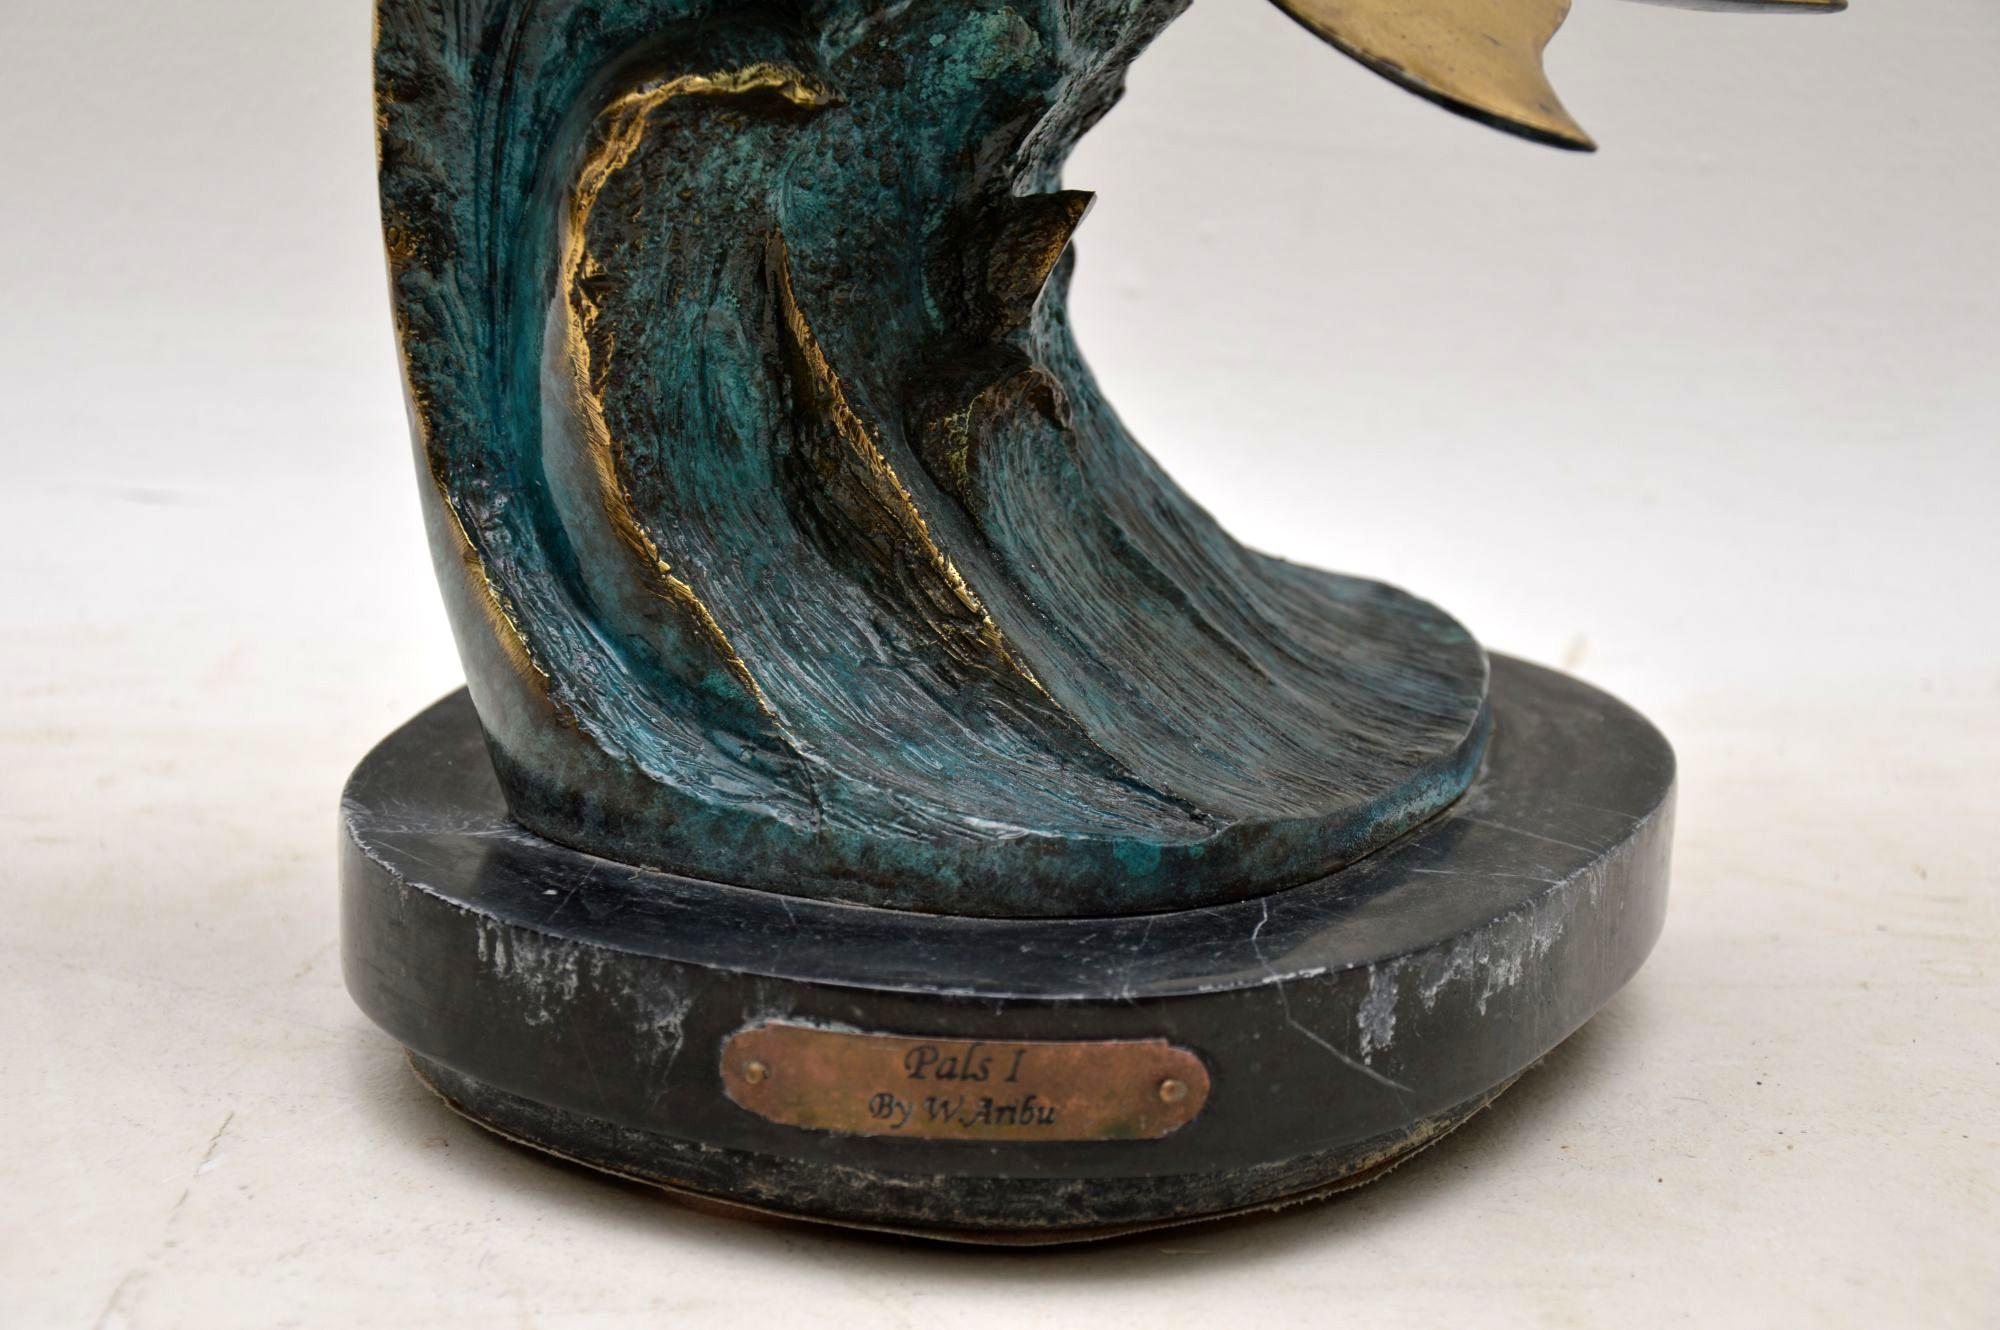 A stunning and highly collectable midcentury bronze sculpture by William Aribu, made in America in the mid-late 20th century. This is titles ‘Pals 1’ is signed by the artist and numbered 005/300. The bronze is finished in blue and gold, this is